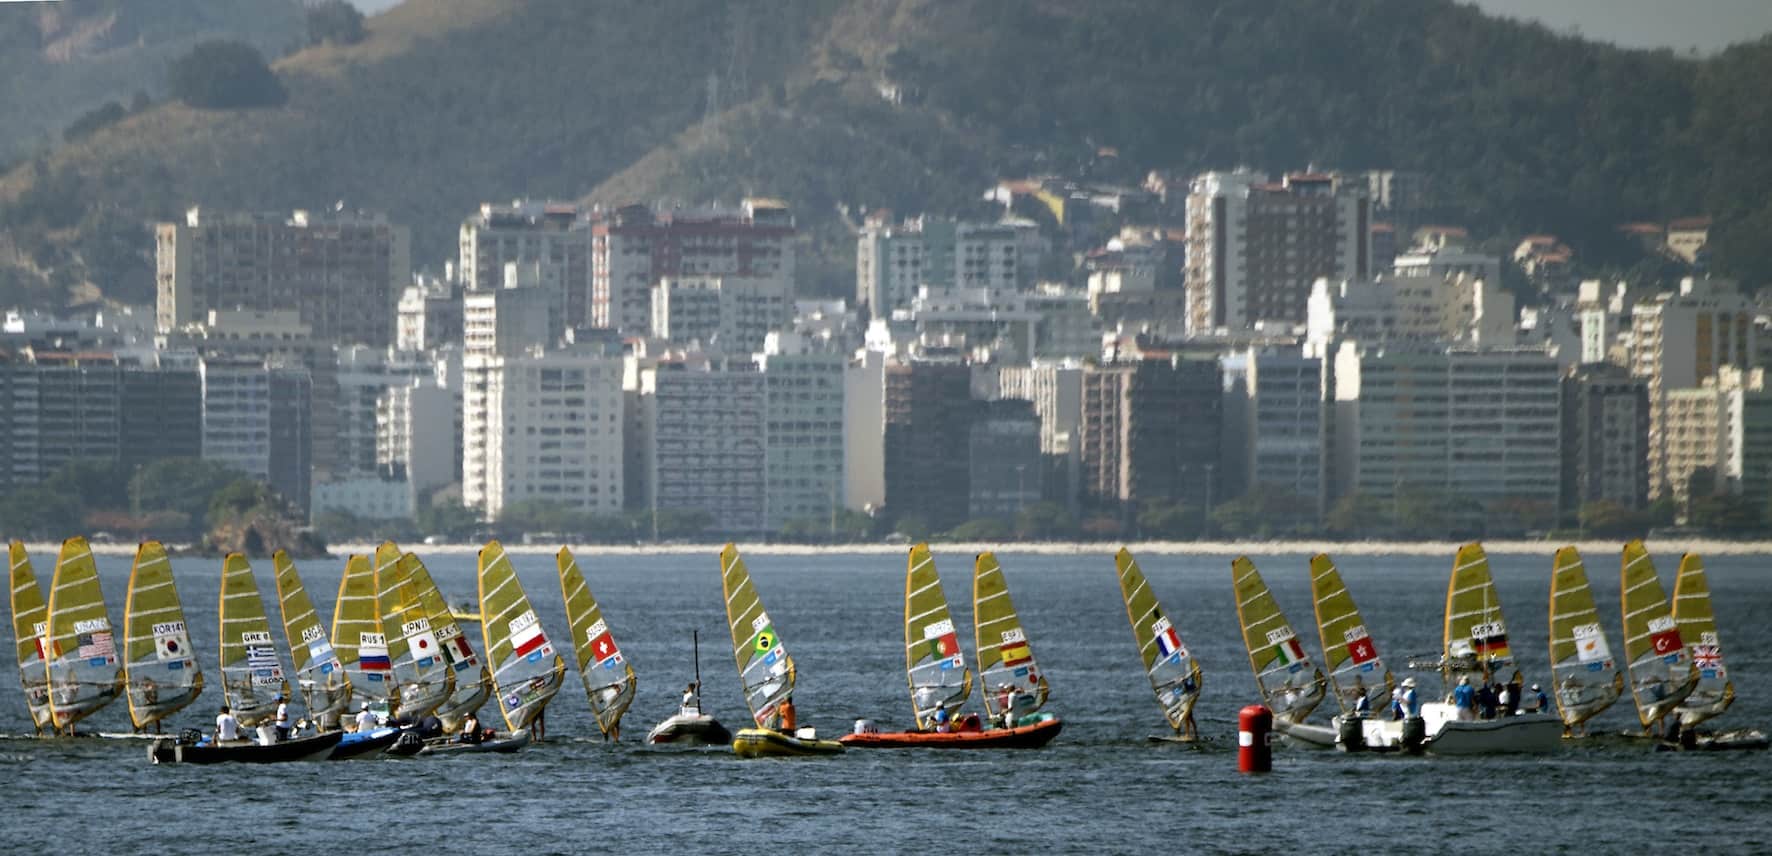 Sailing boats compete in the International Sailing Regatta held in the Guanabara Bay in Rio de Janeiro, Brazil on Aug. 19, 2015, an event that serves as a test for the Rio 2016 Olympic Games.